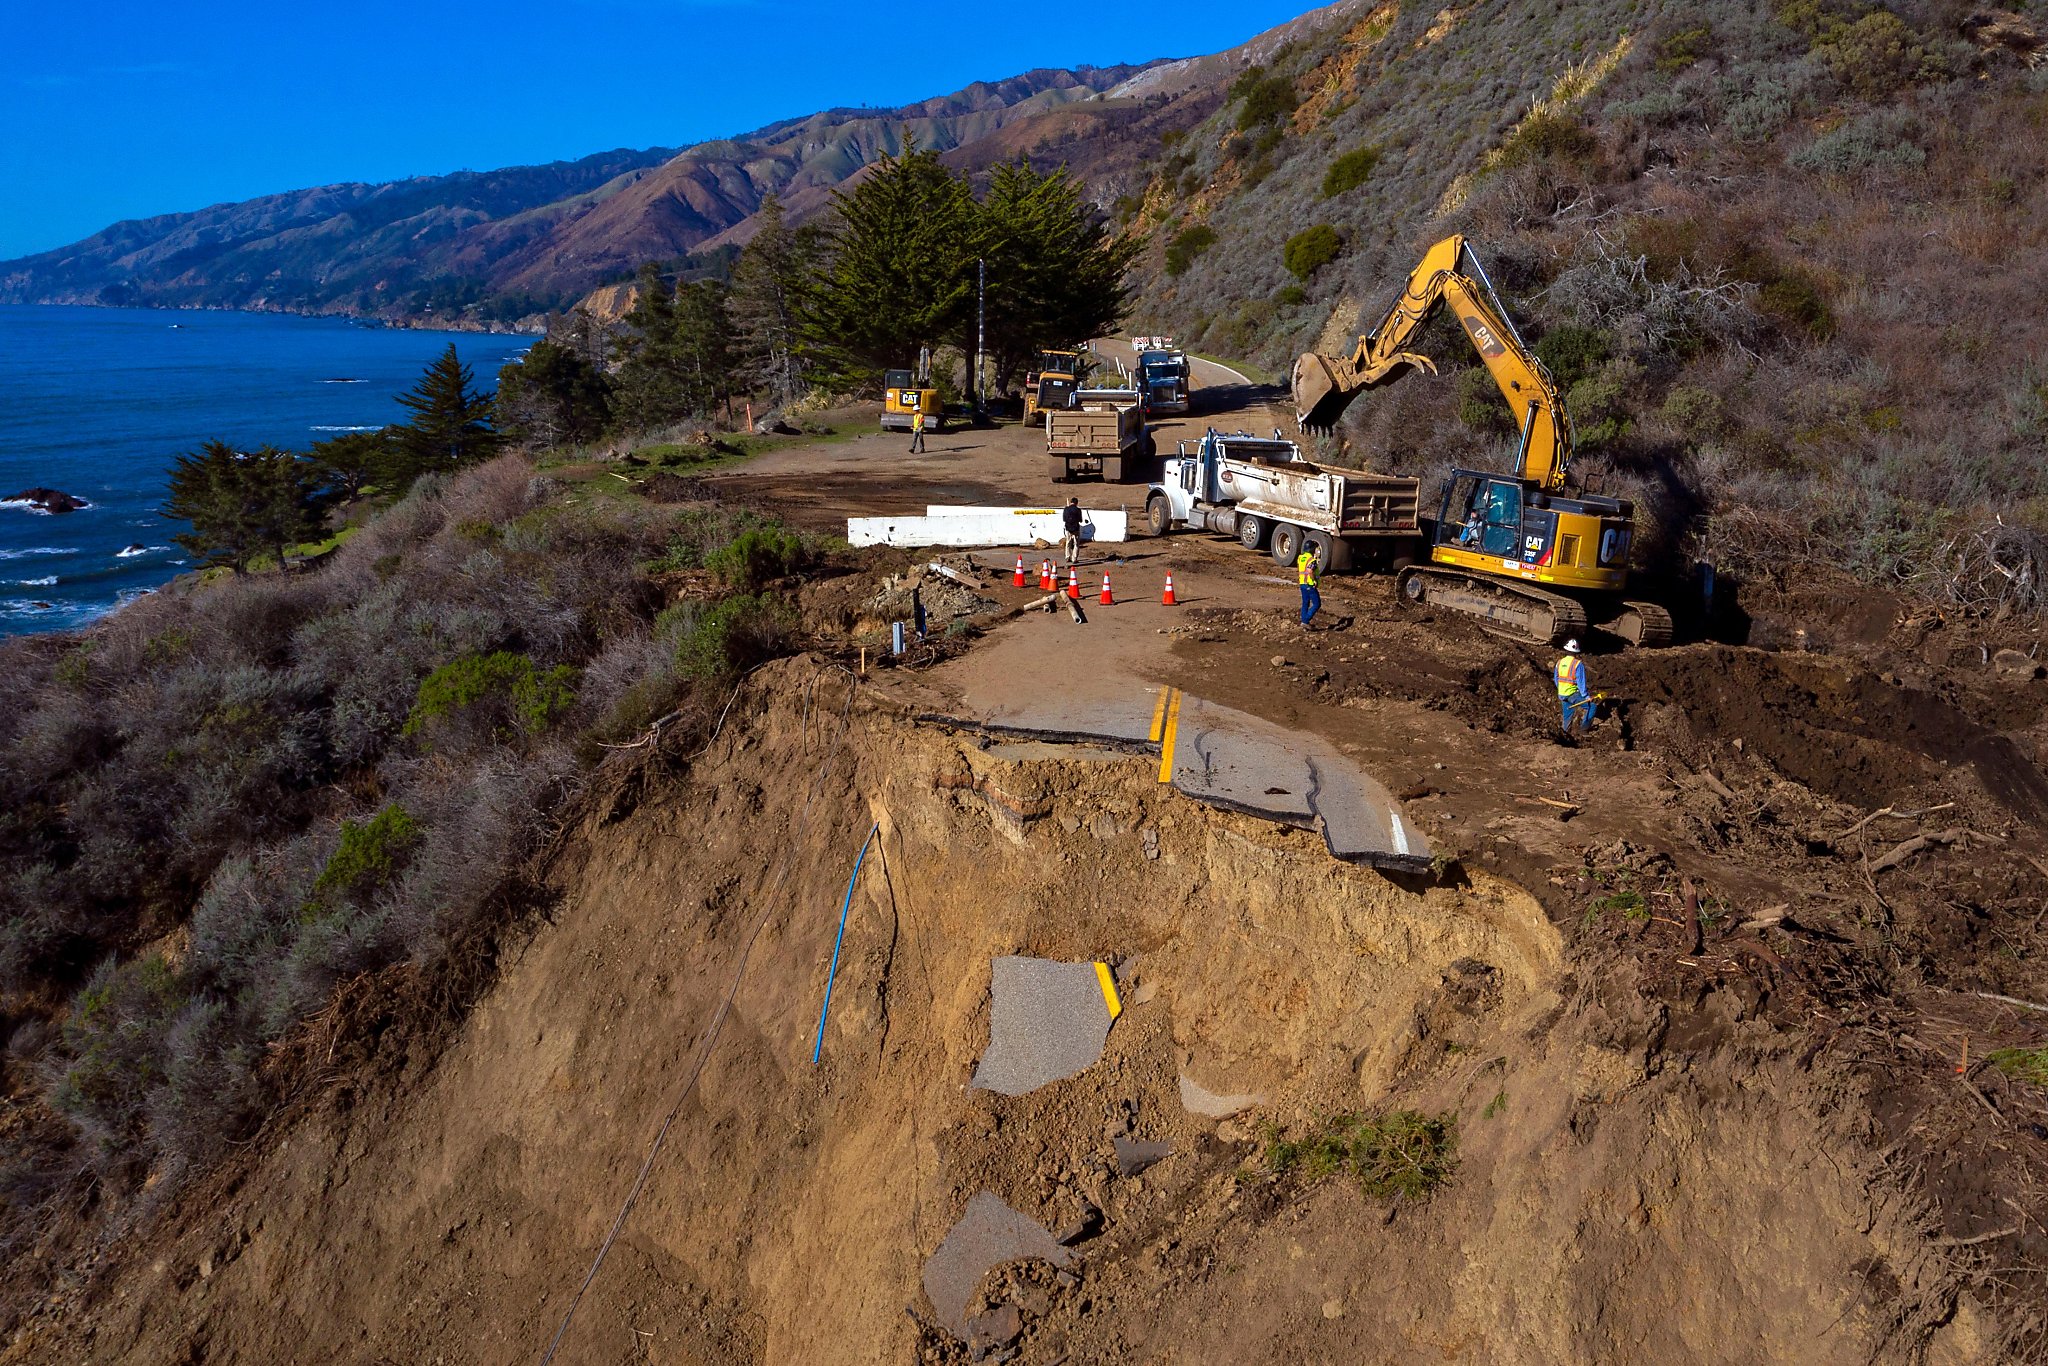 Highway 1 Through Big Sur Will Be Repaired How Long That Takes Is Unclear